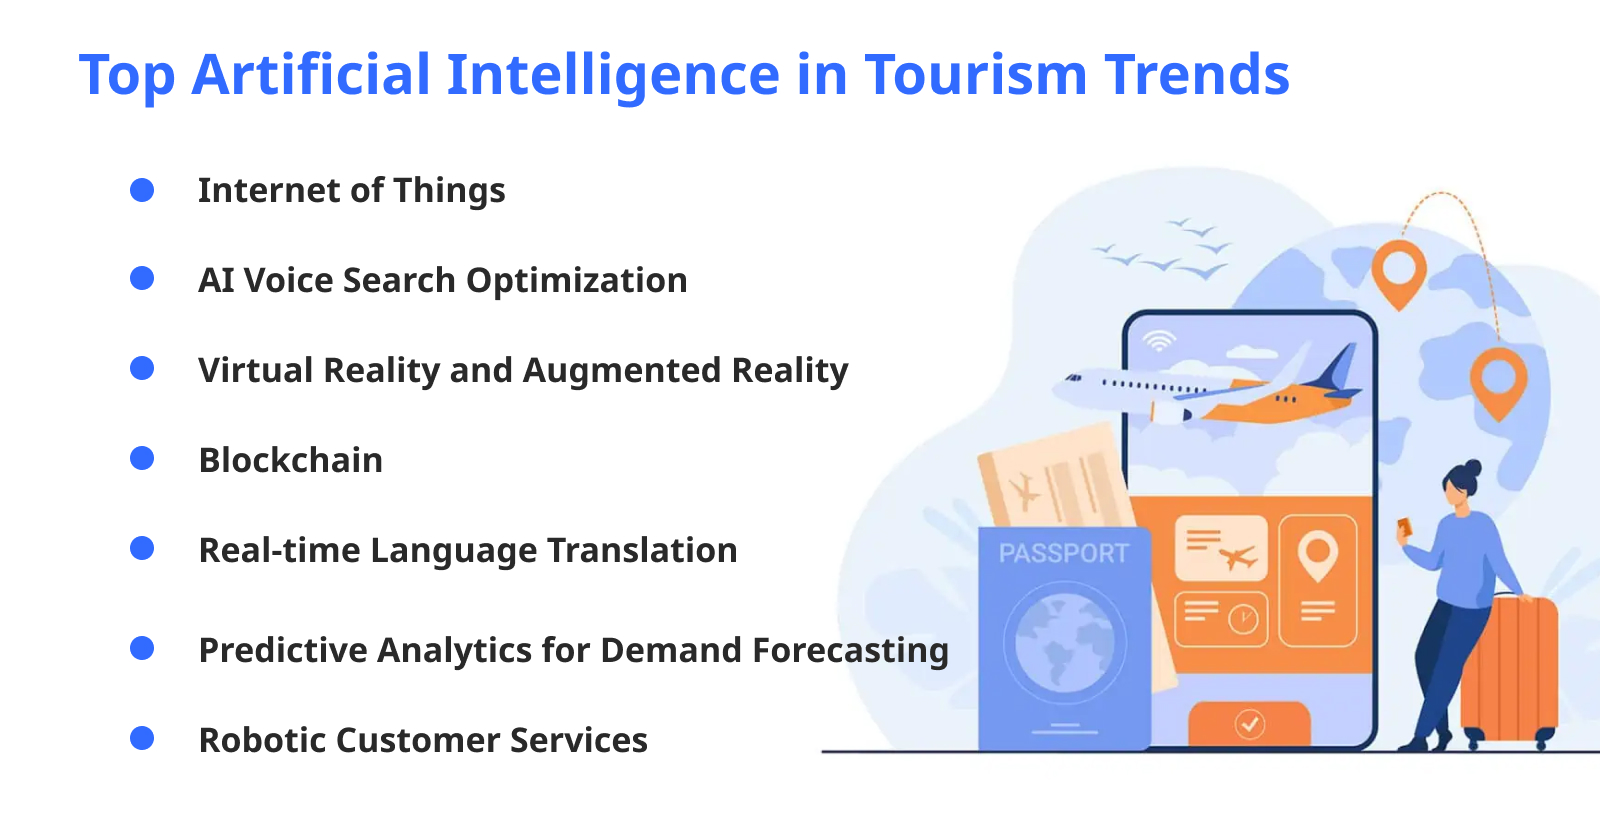 Top Artificial Intelligence in Tourism Trends (1)